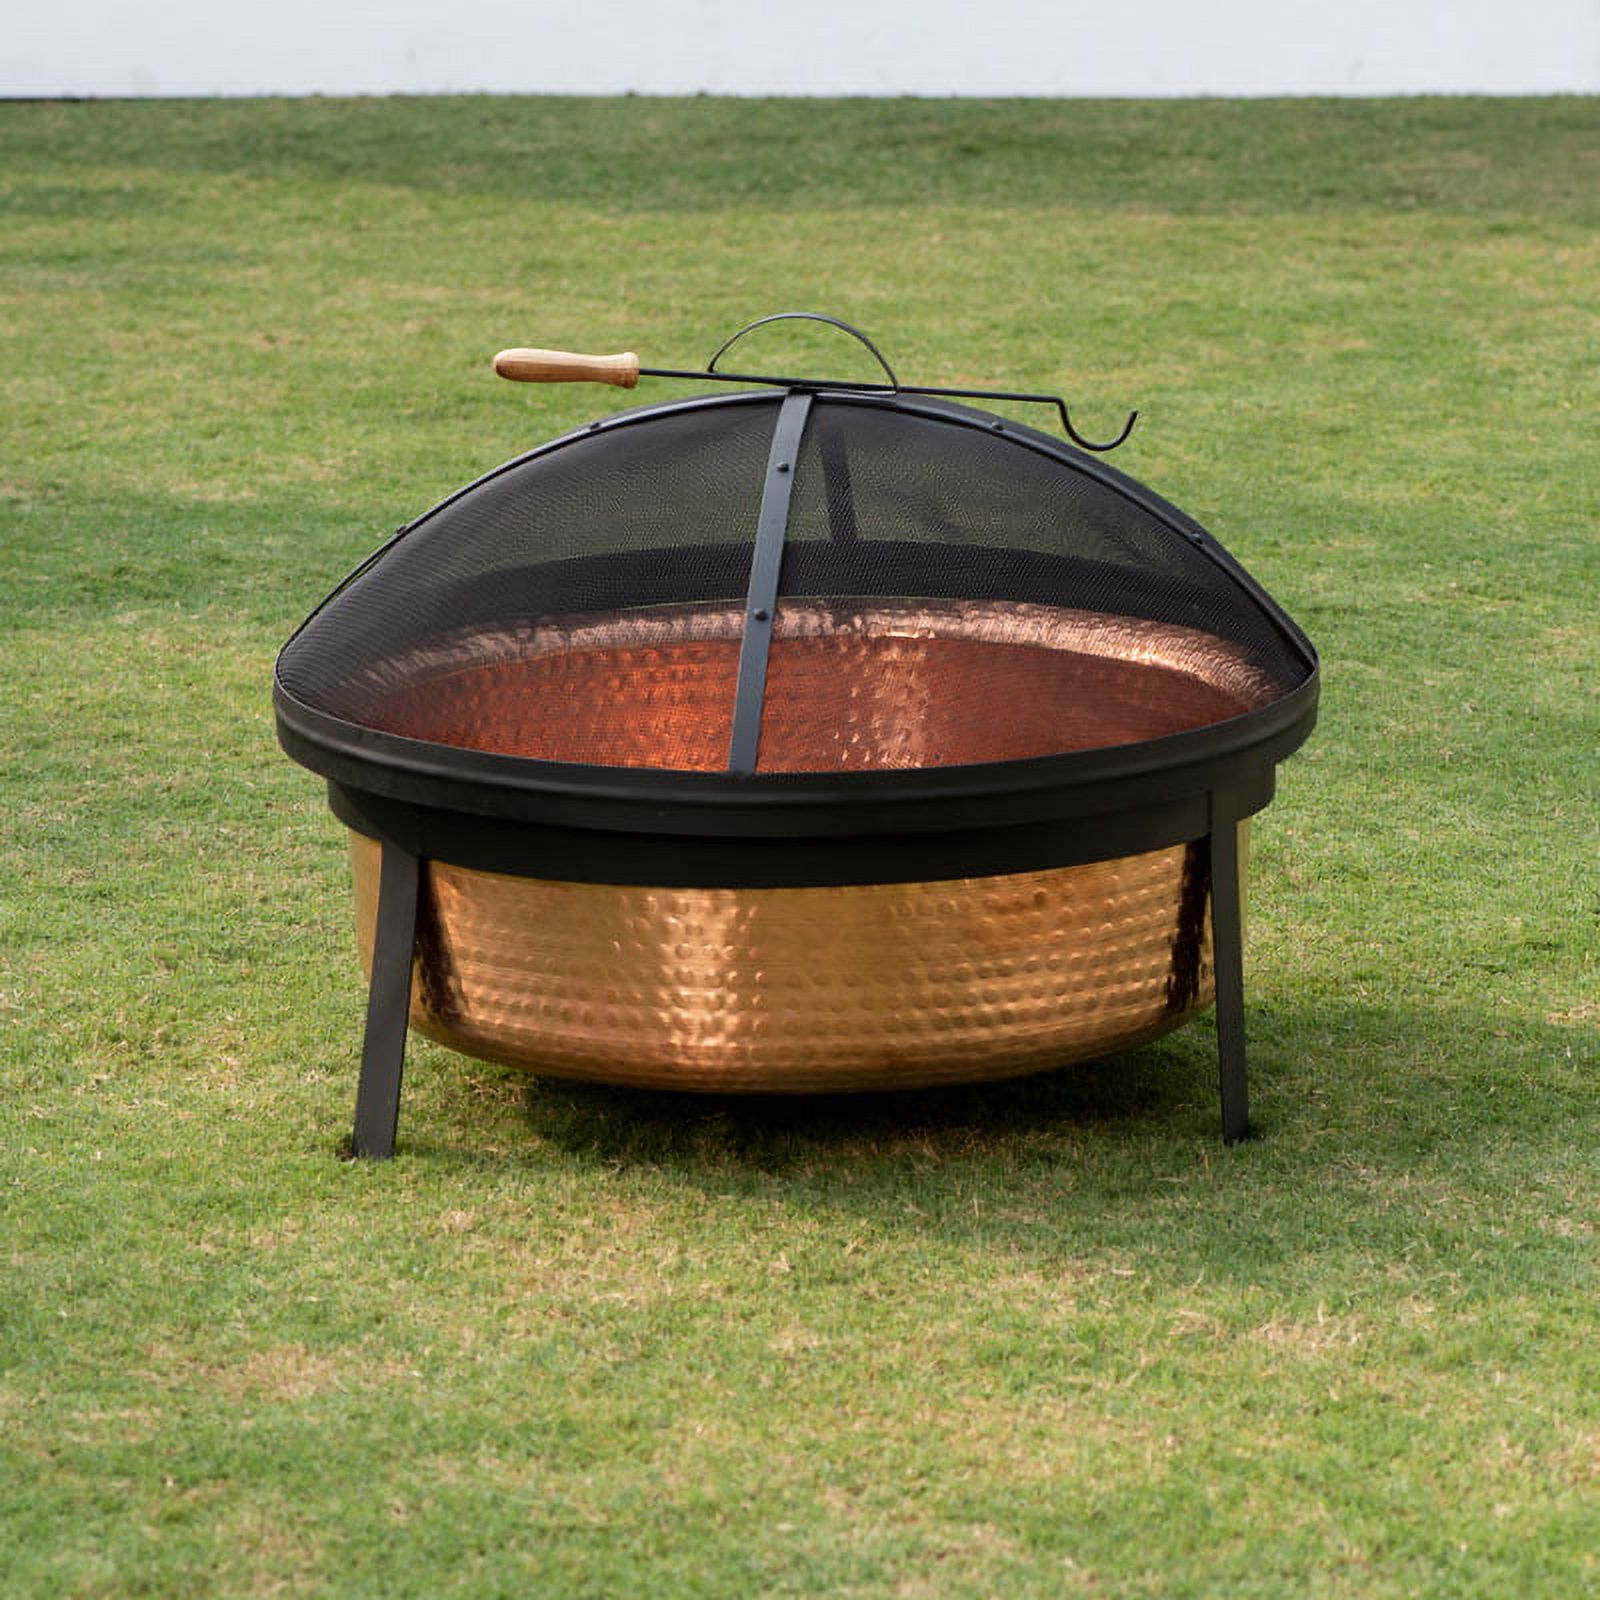 Better Homes & Gardens Wood Burning Copper Fire Pit, 30-inch diameter and 22-inch Height - image 3 of 9